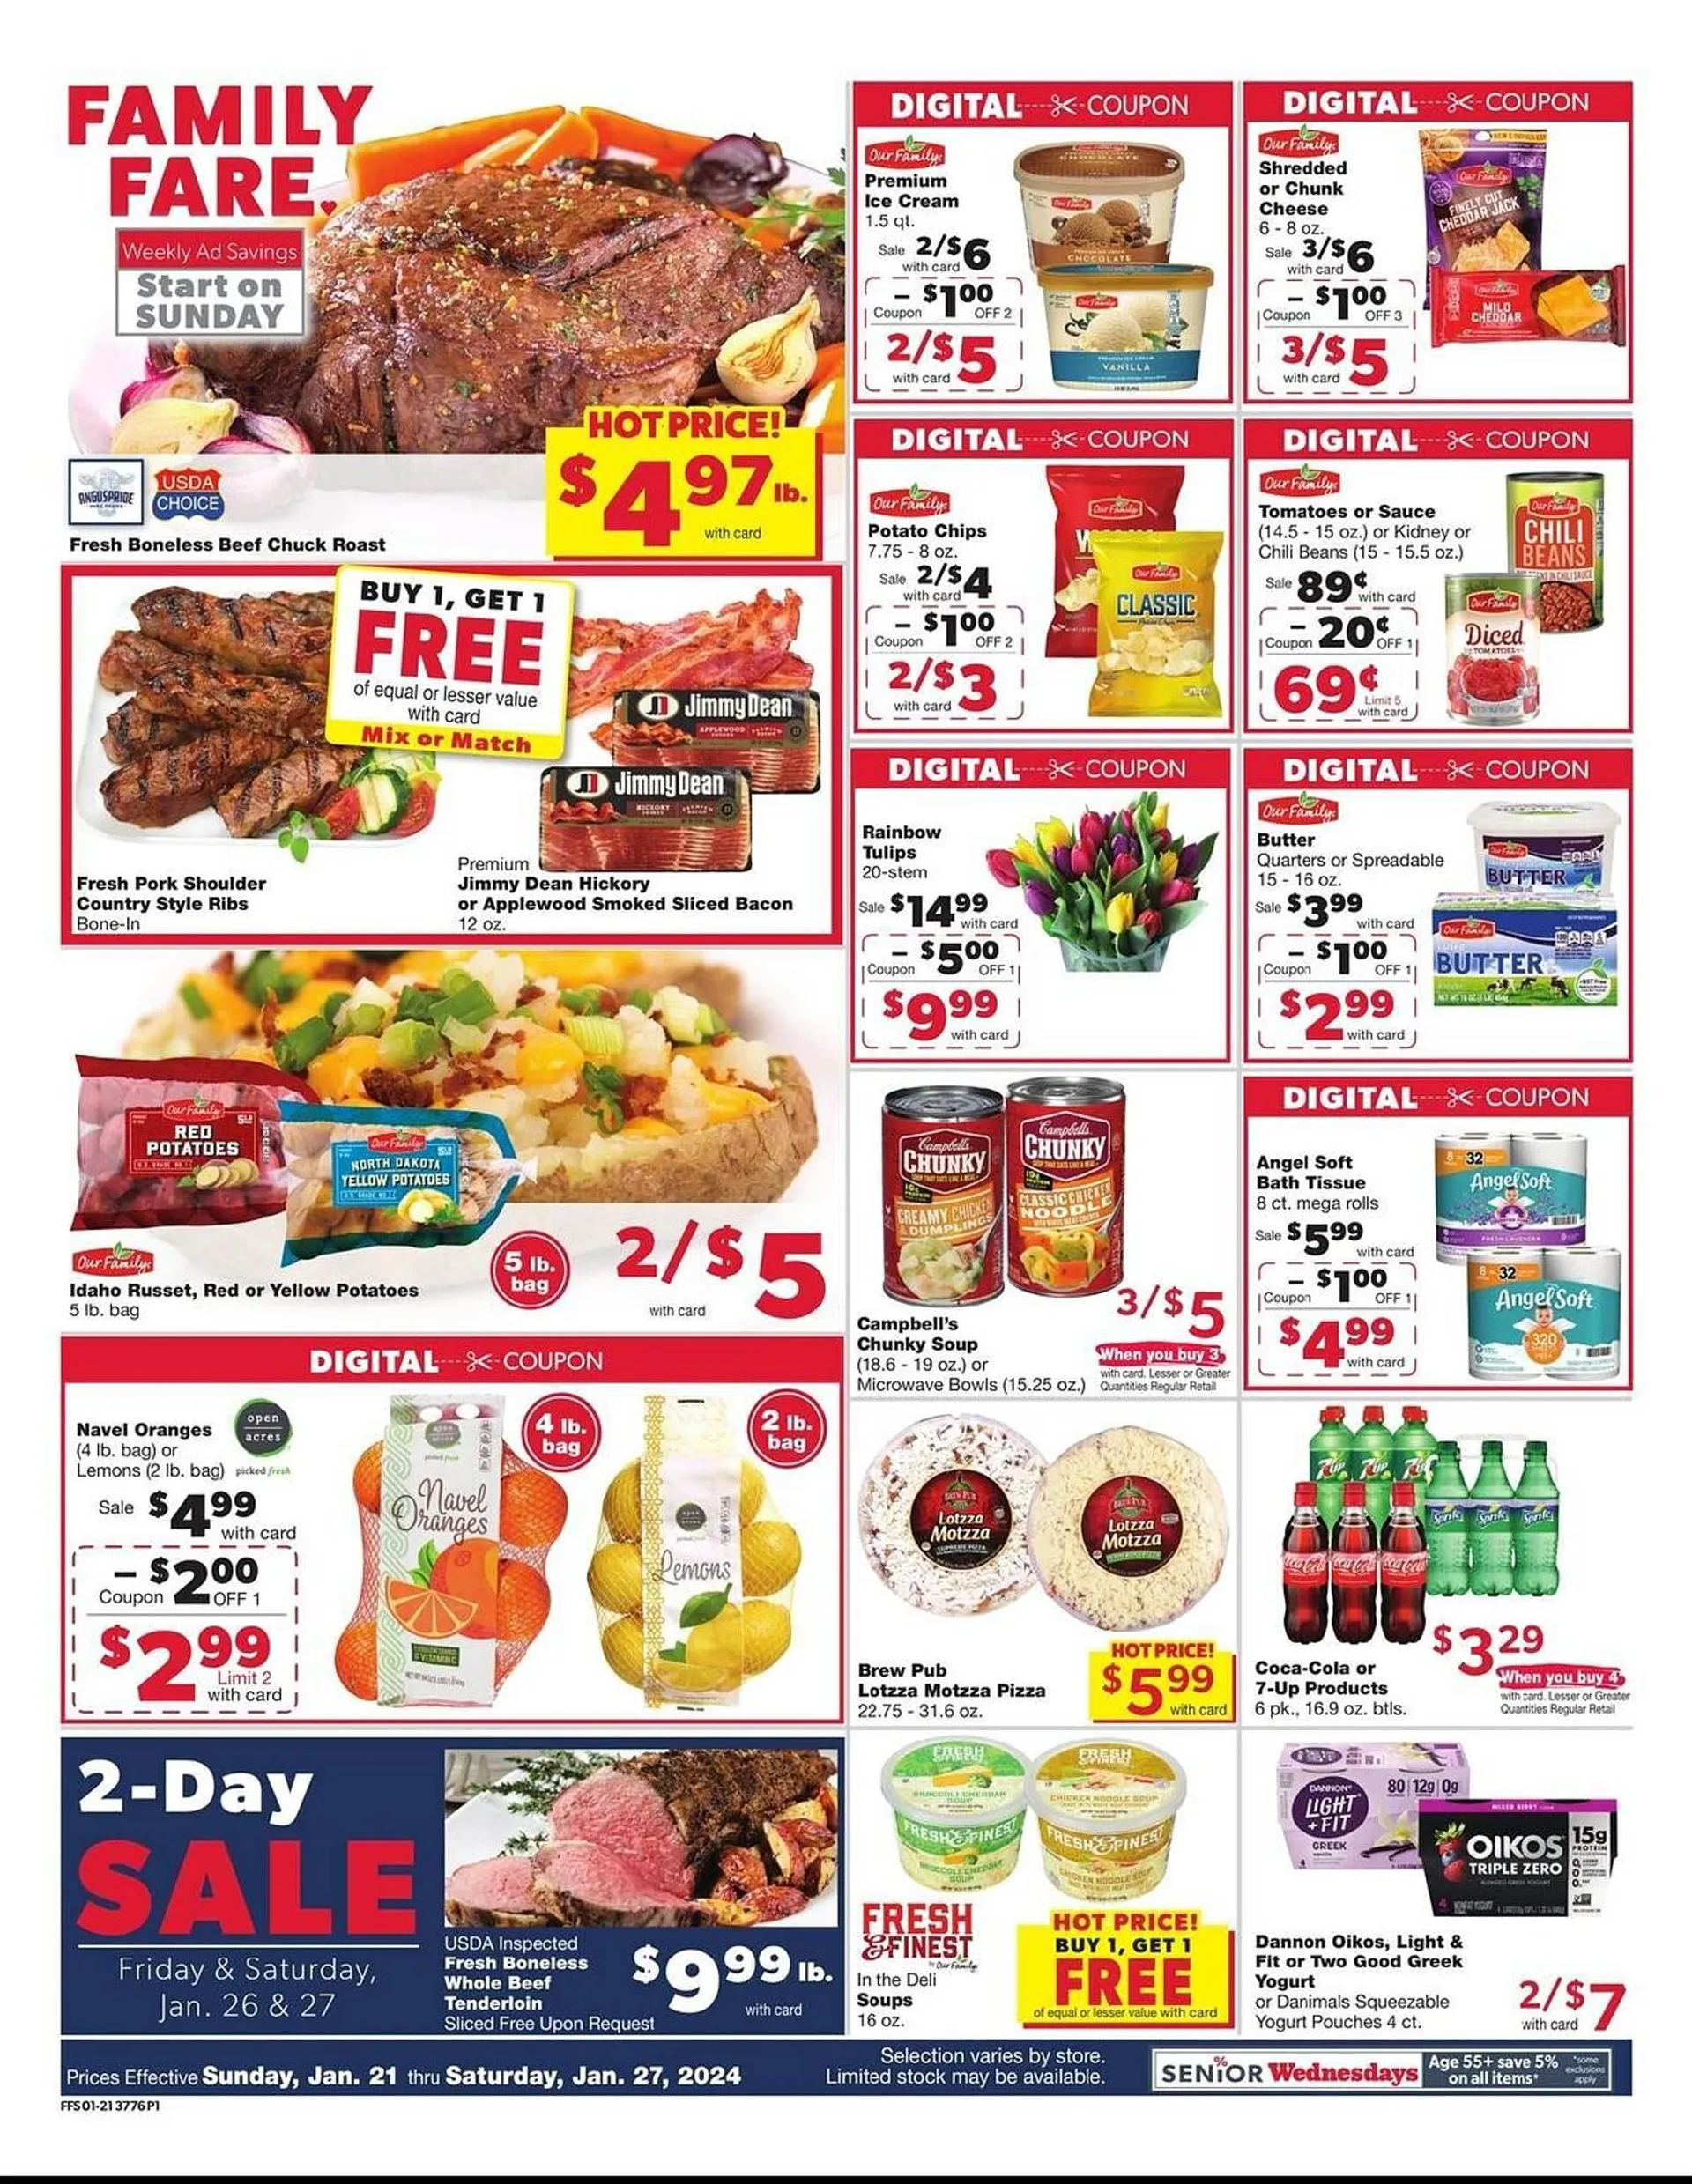 Family Fare Weekly Ad | Valid until 1/27/2024